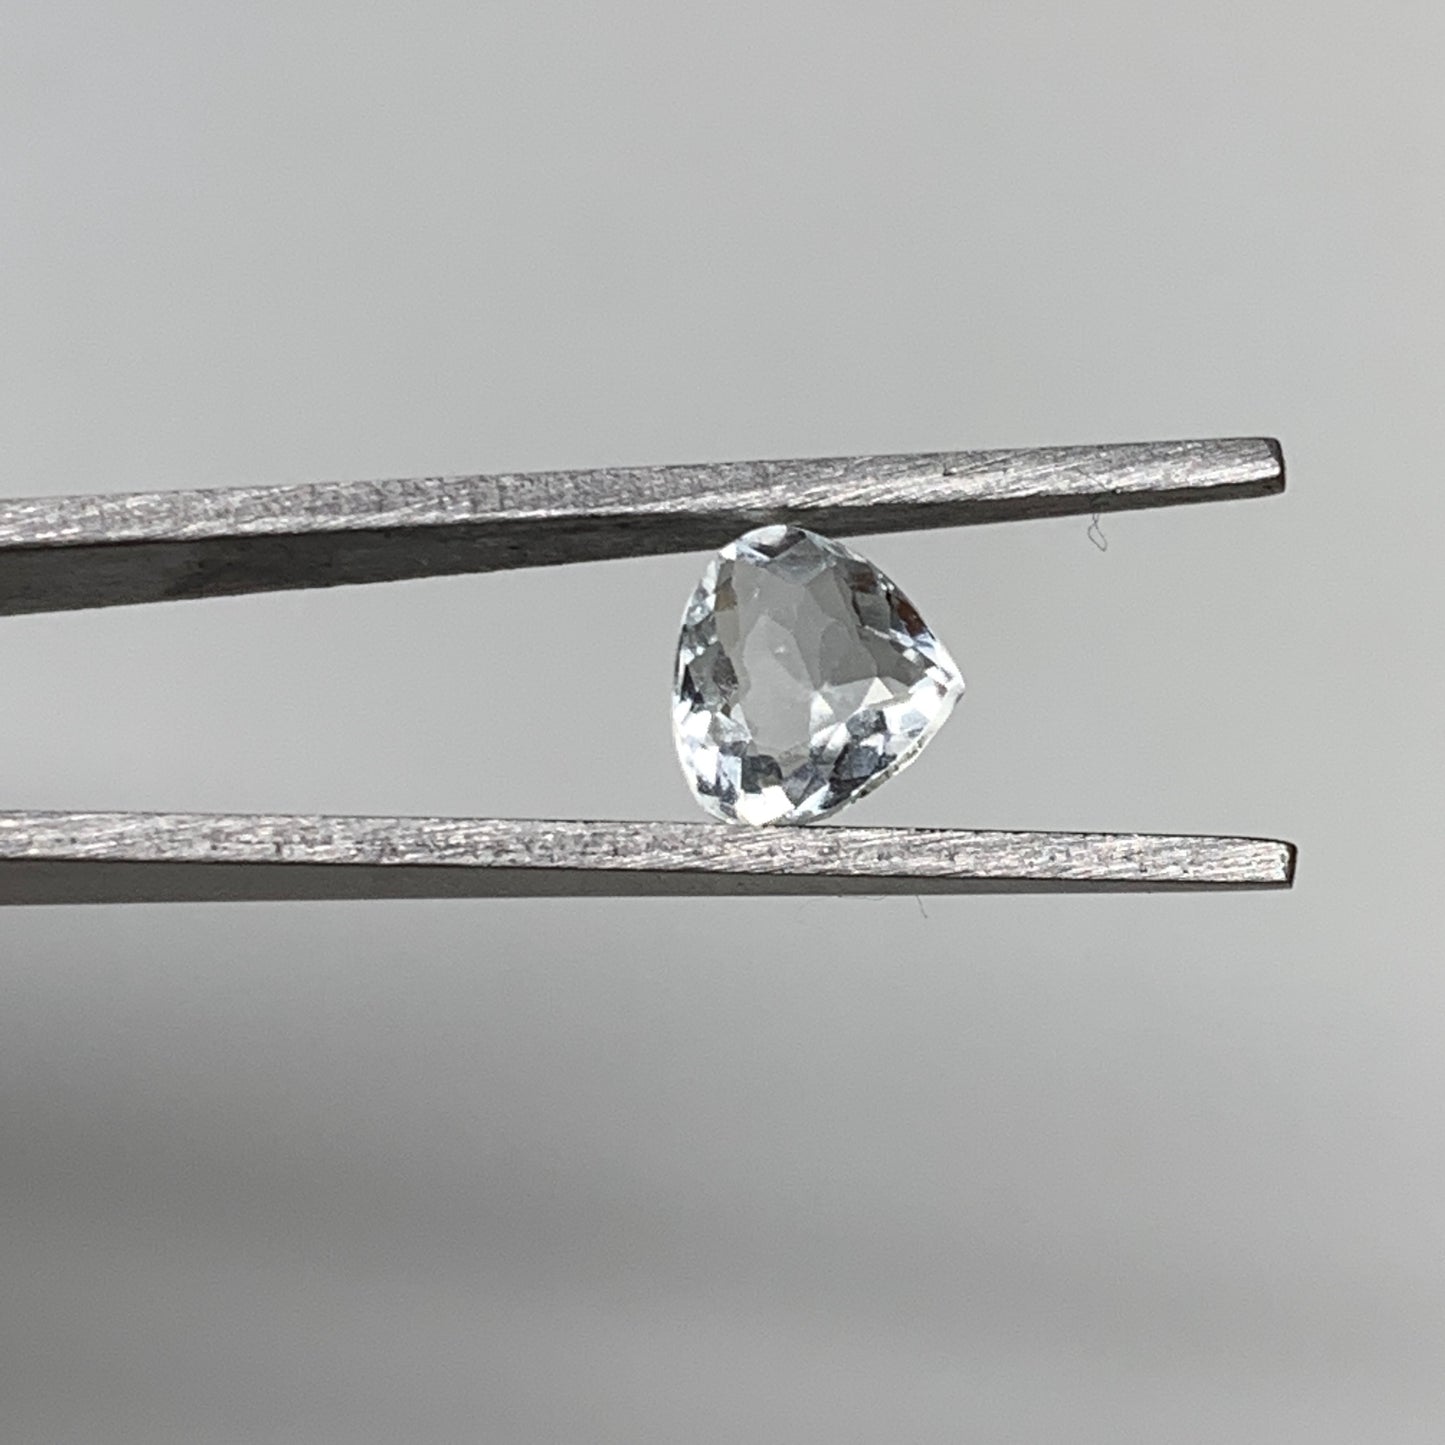 1.11cts, 7mmx7mmx3mm, Aquamarine Crystal Facetted Stone Loose @Pakistan,CTS201